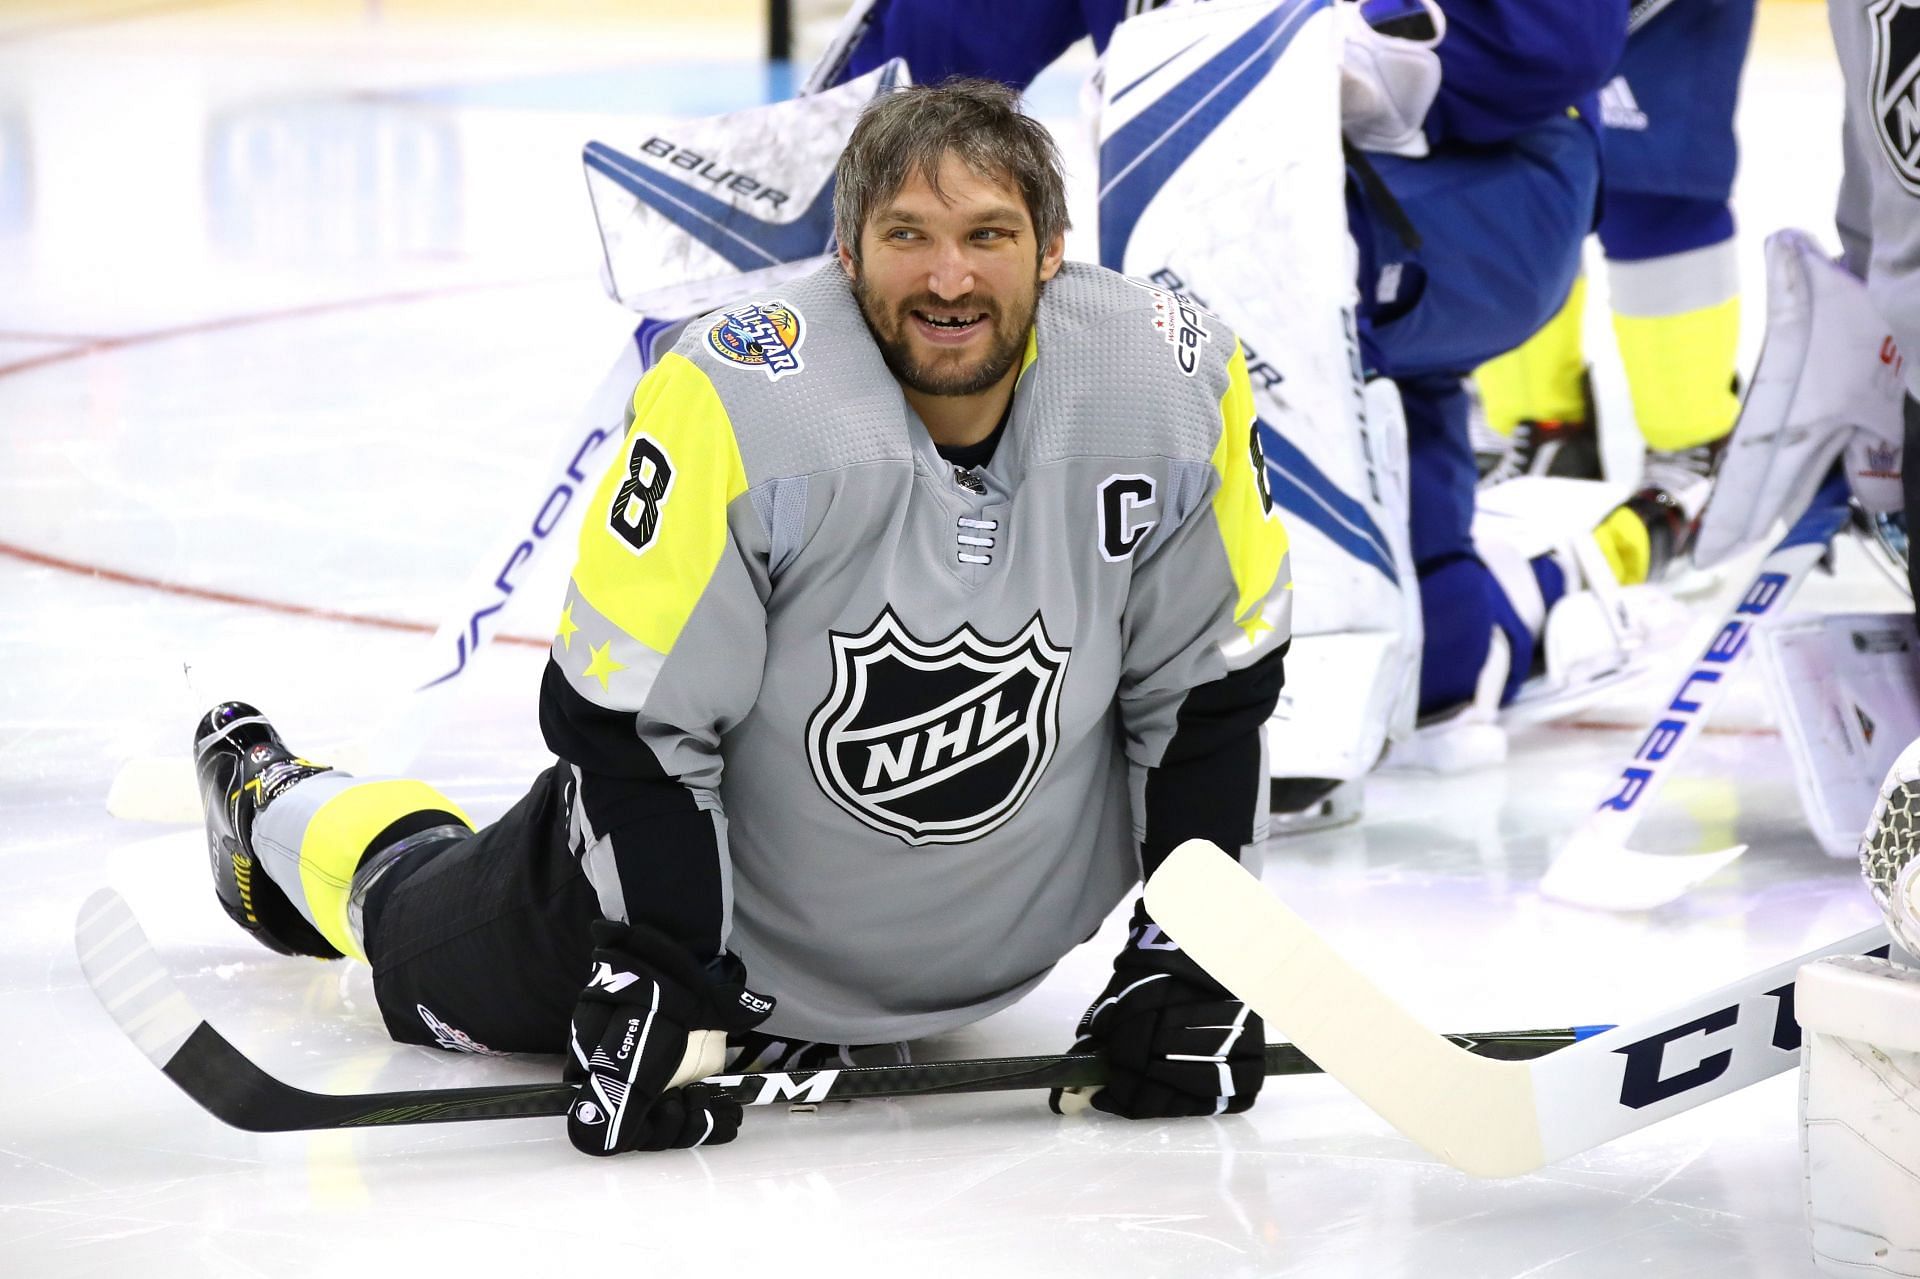 Alex Ovechkin at the 2018 Honda NHL All-Star Game